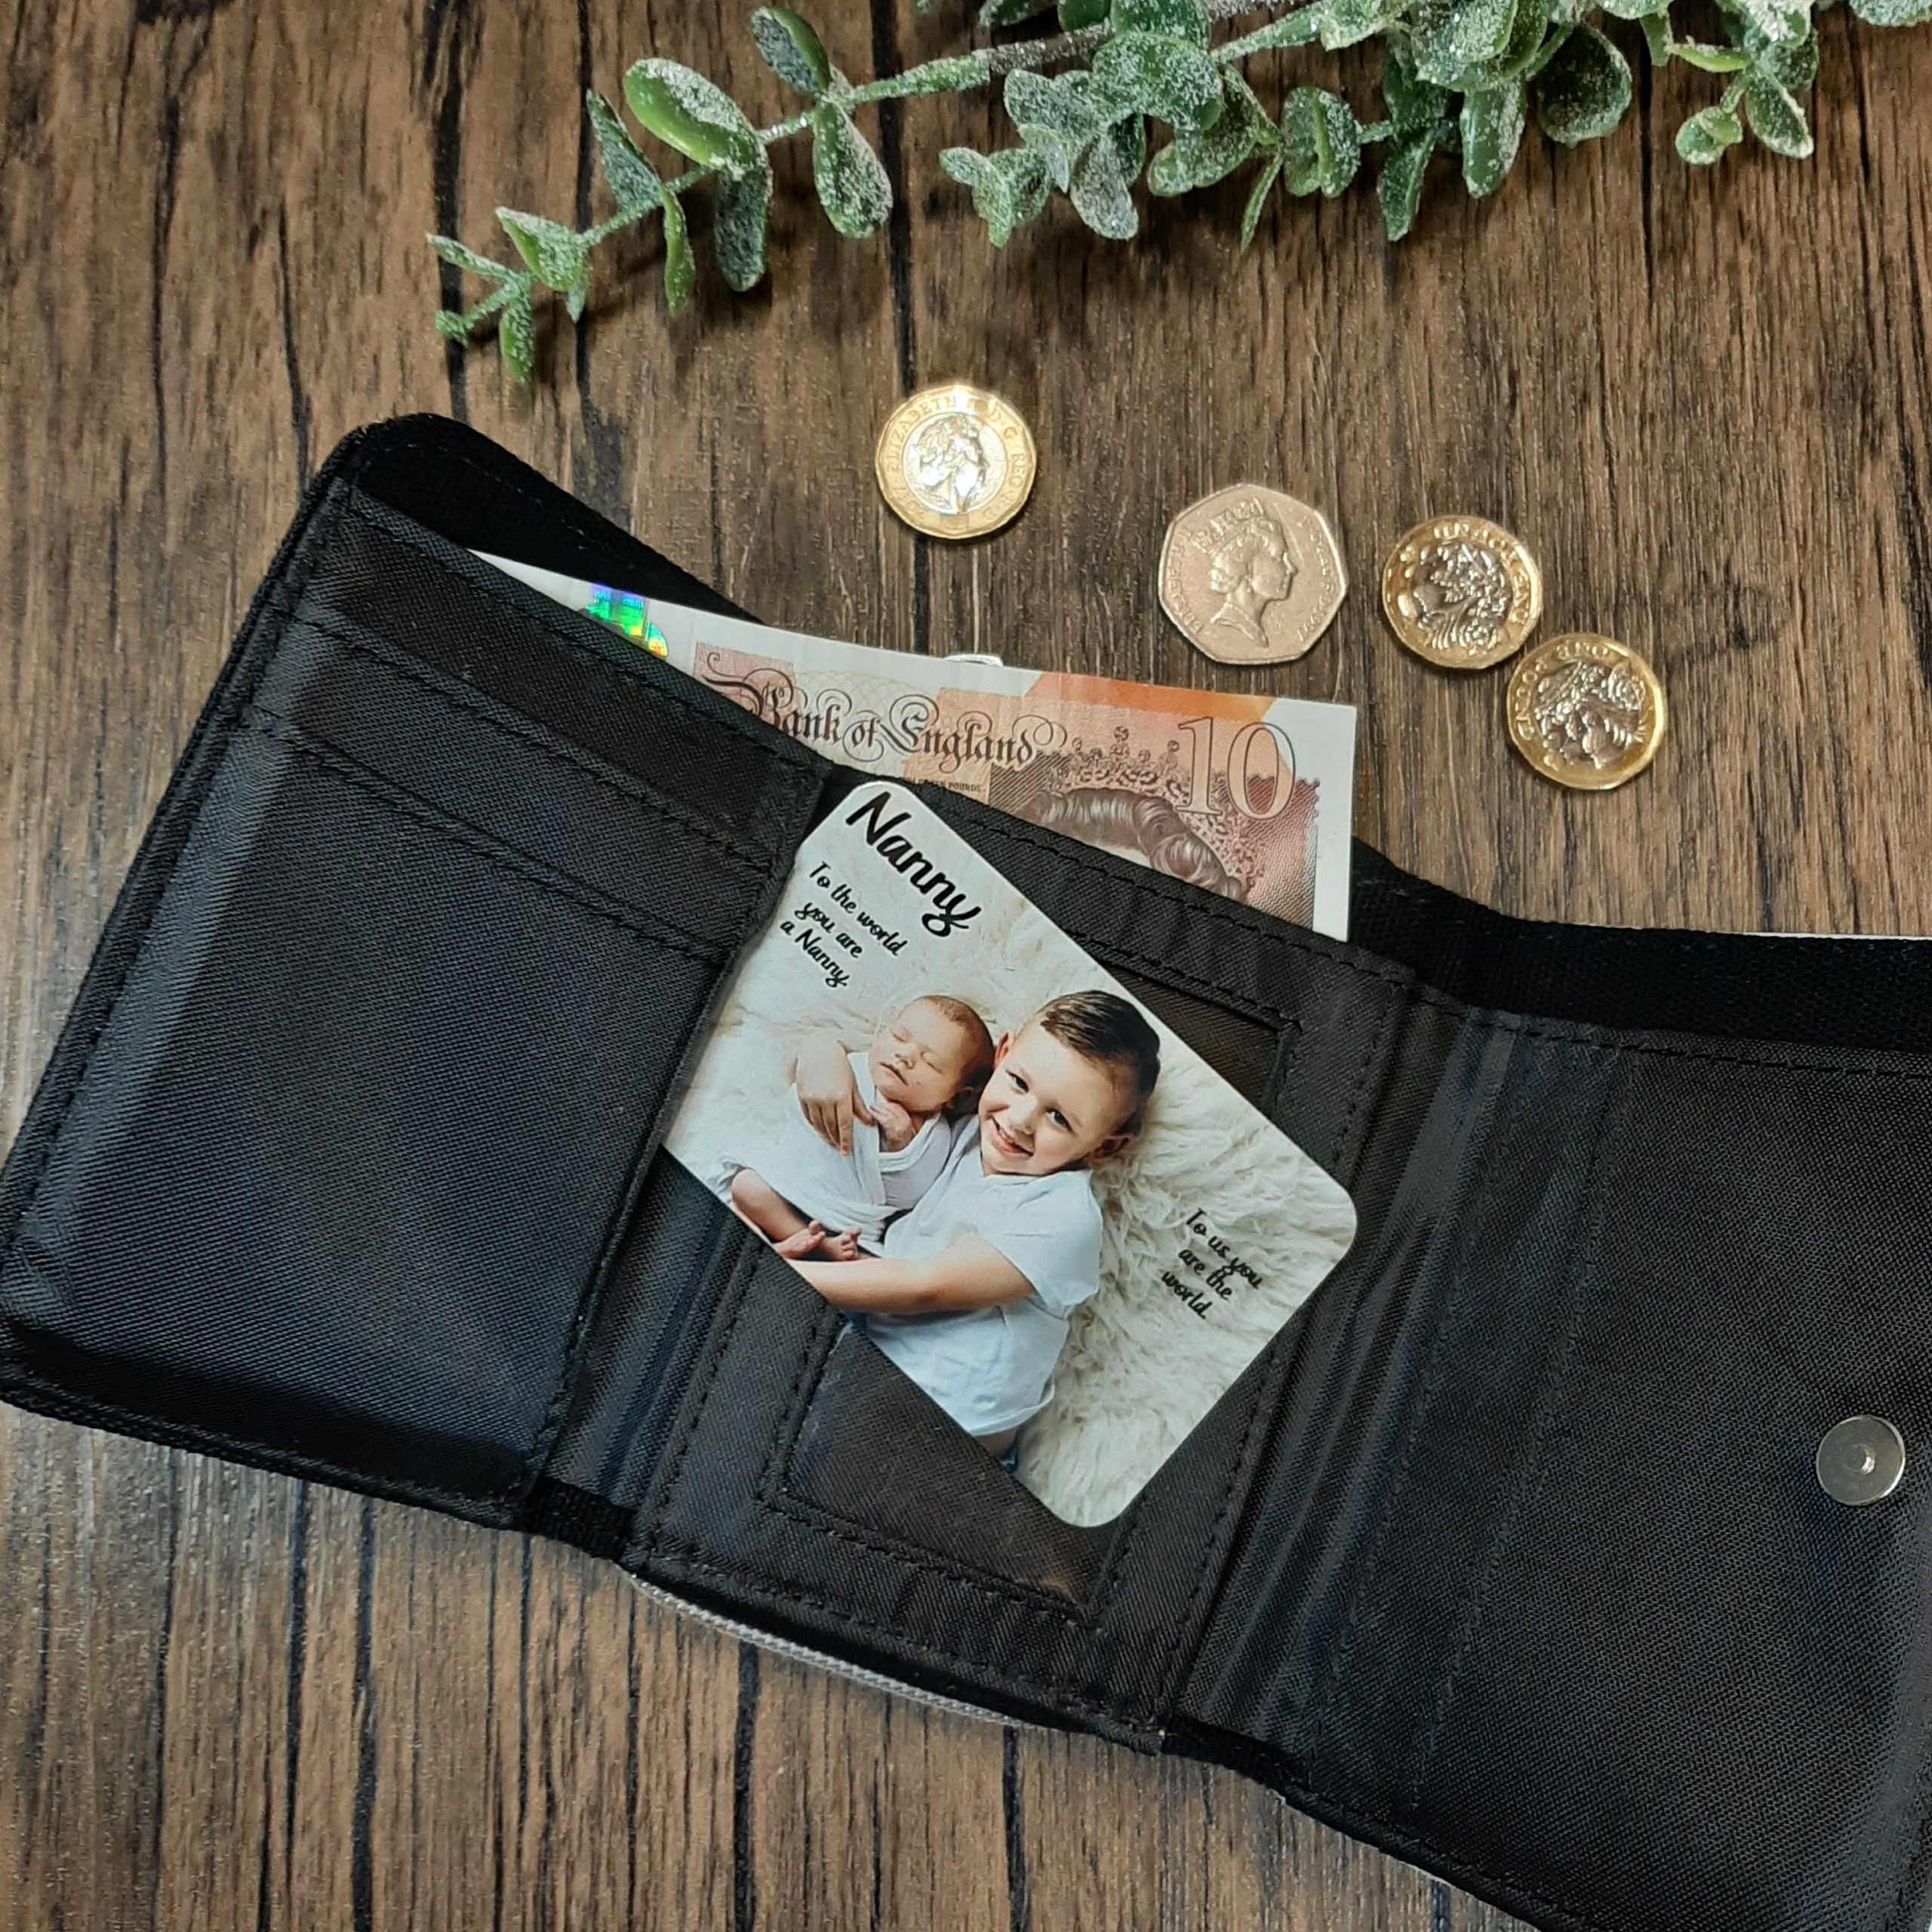 Aluminum Wallet Photo Card - lovely family photo printed with personalised message pocking out of a wallet purse